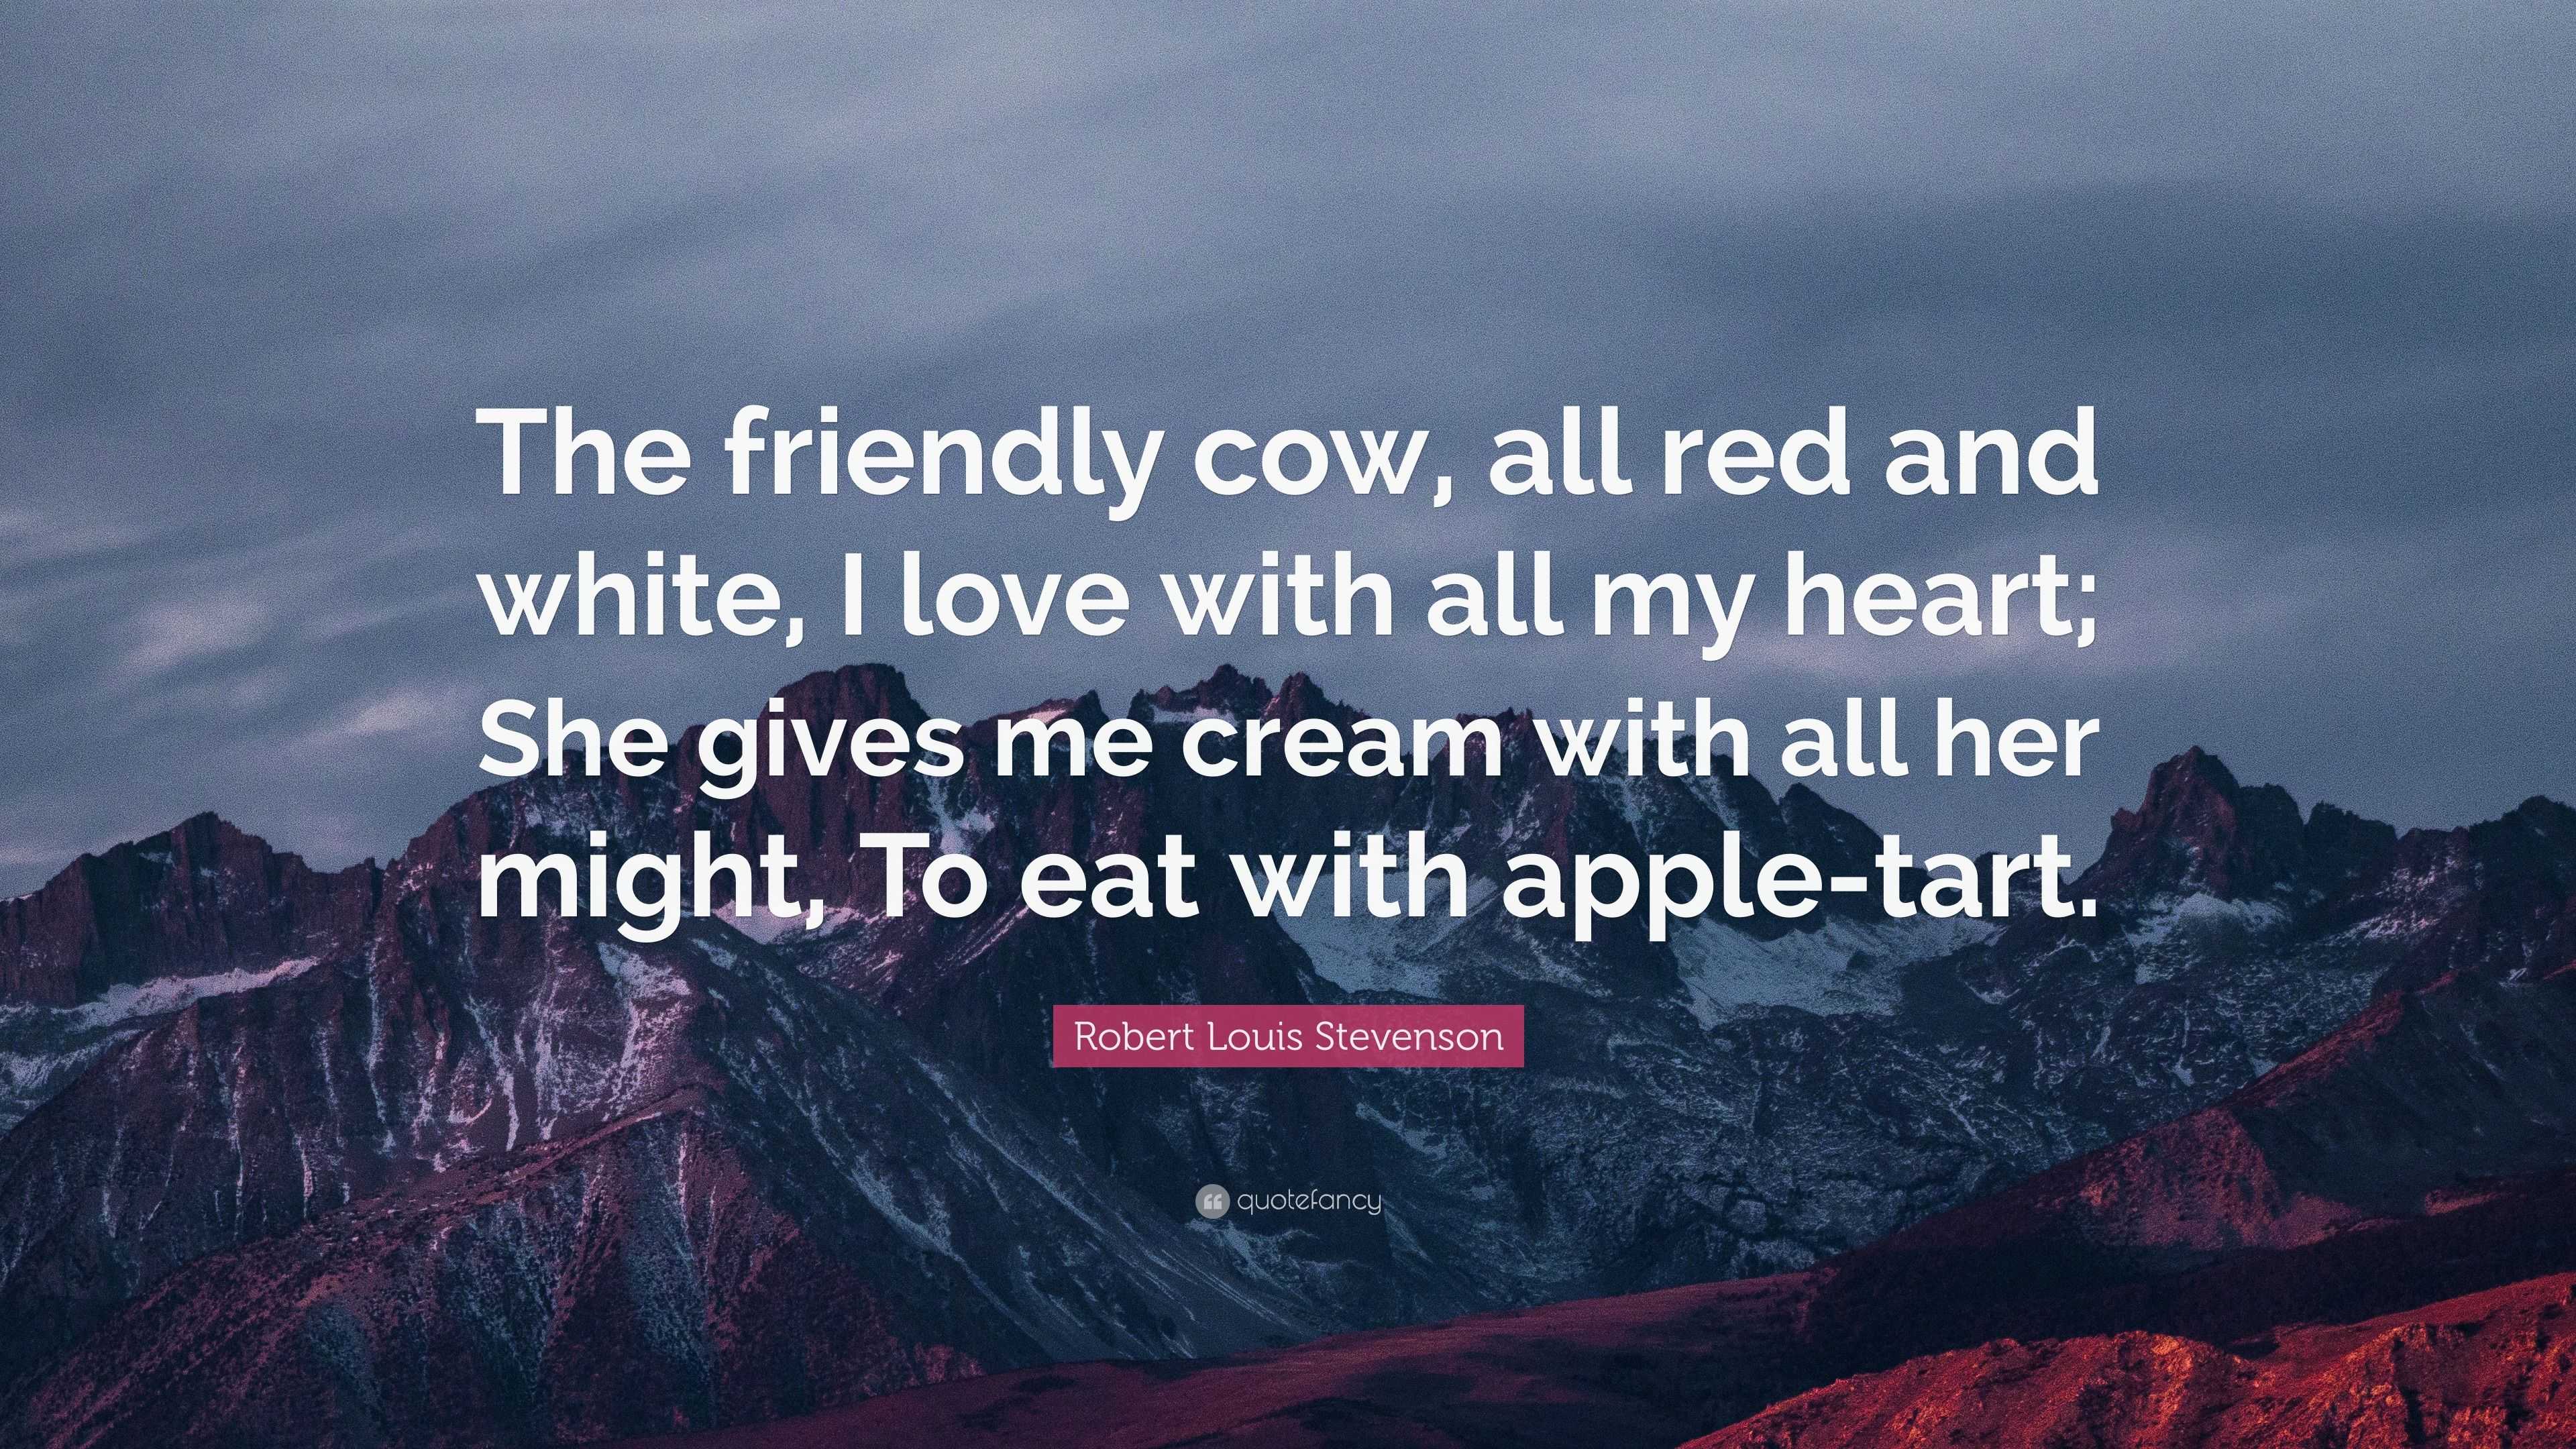 Robert Louis Stevenson Quote “The friendly cow all red and white I